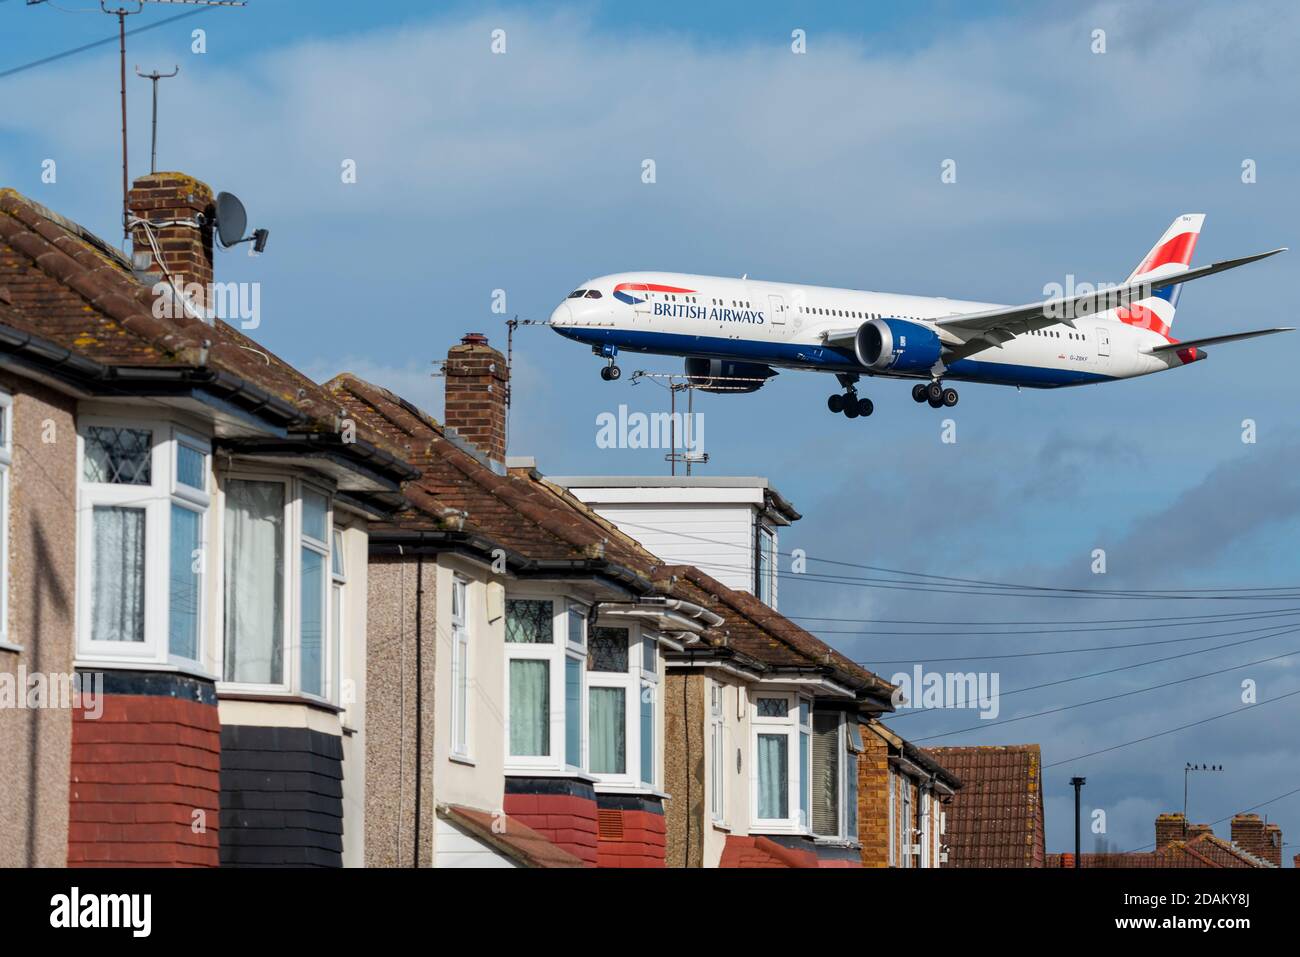 British Airways jet airliner plane on approach to land at London Heathrow Airport, UK, over roofs of homes near airport. Properties under flightpath Stock Photo